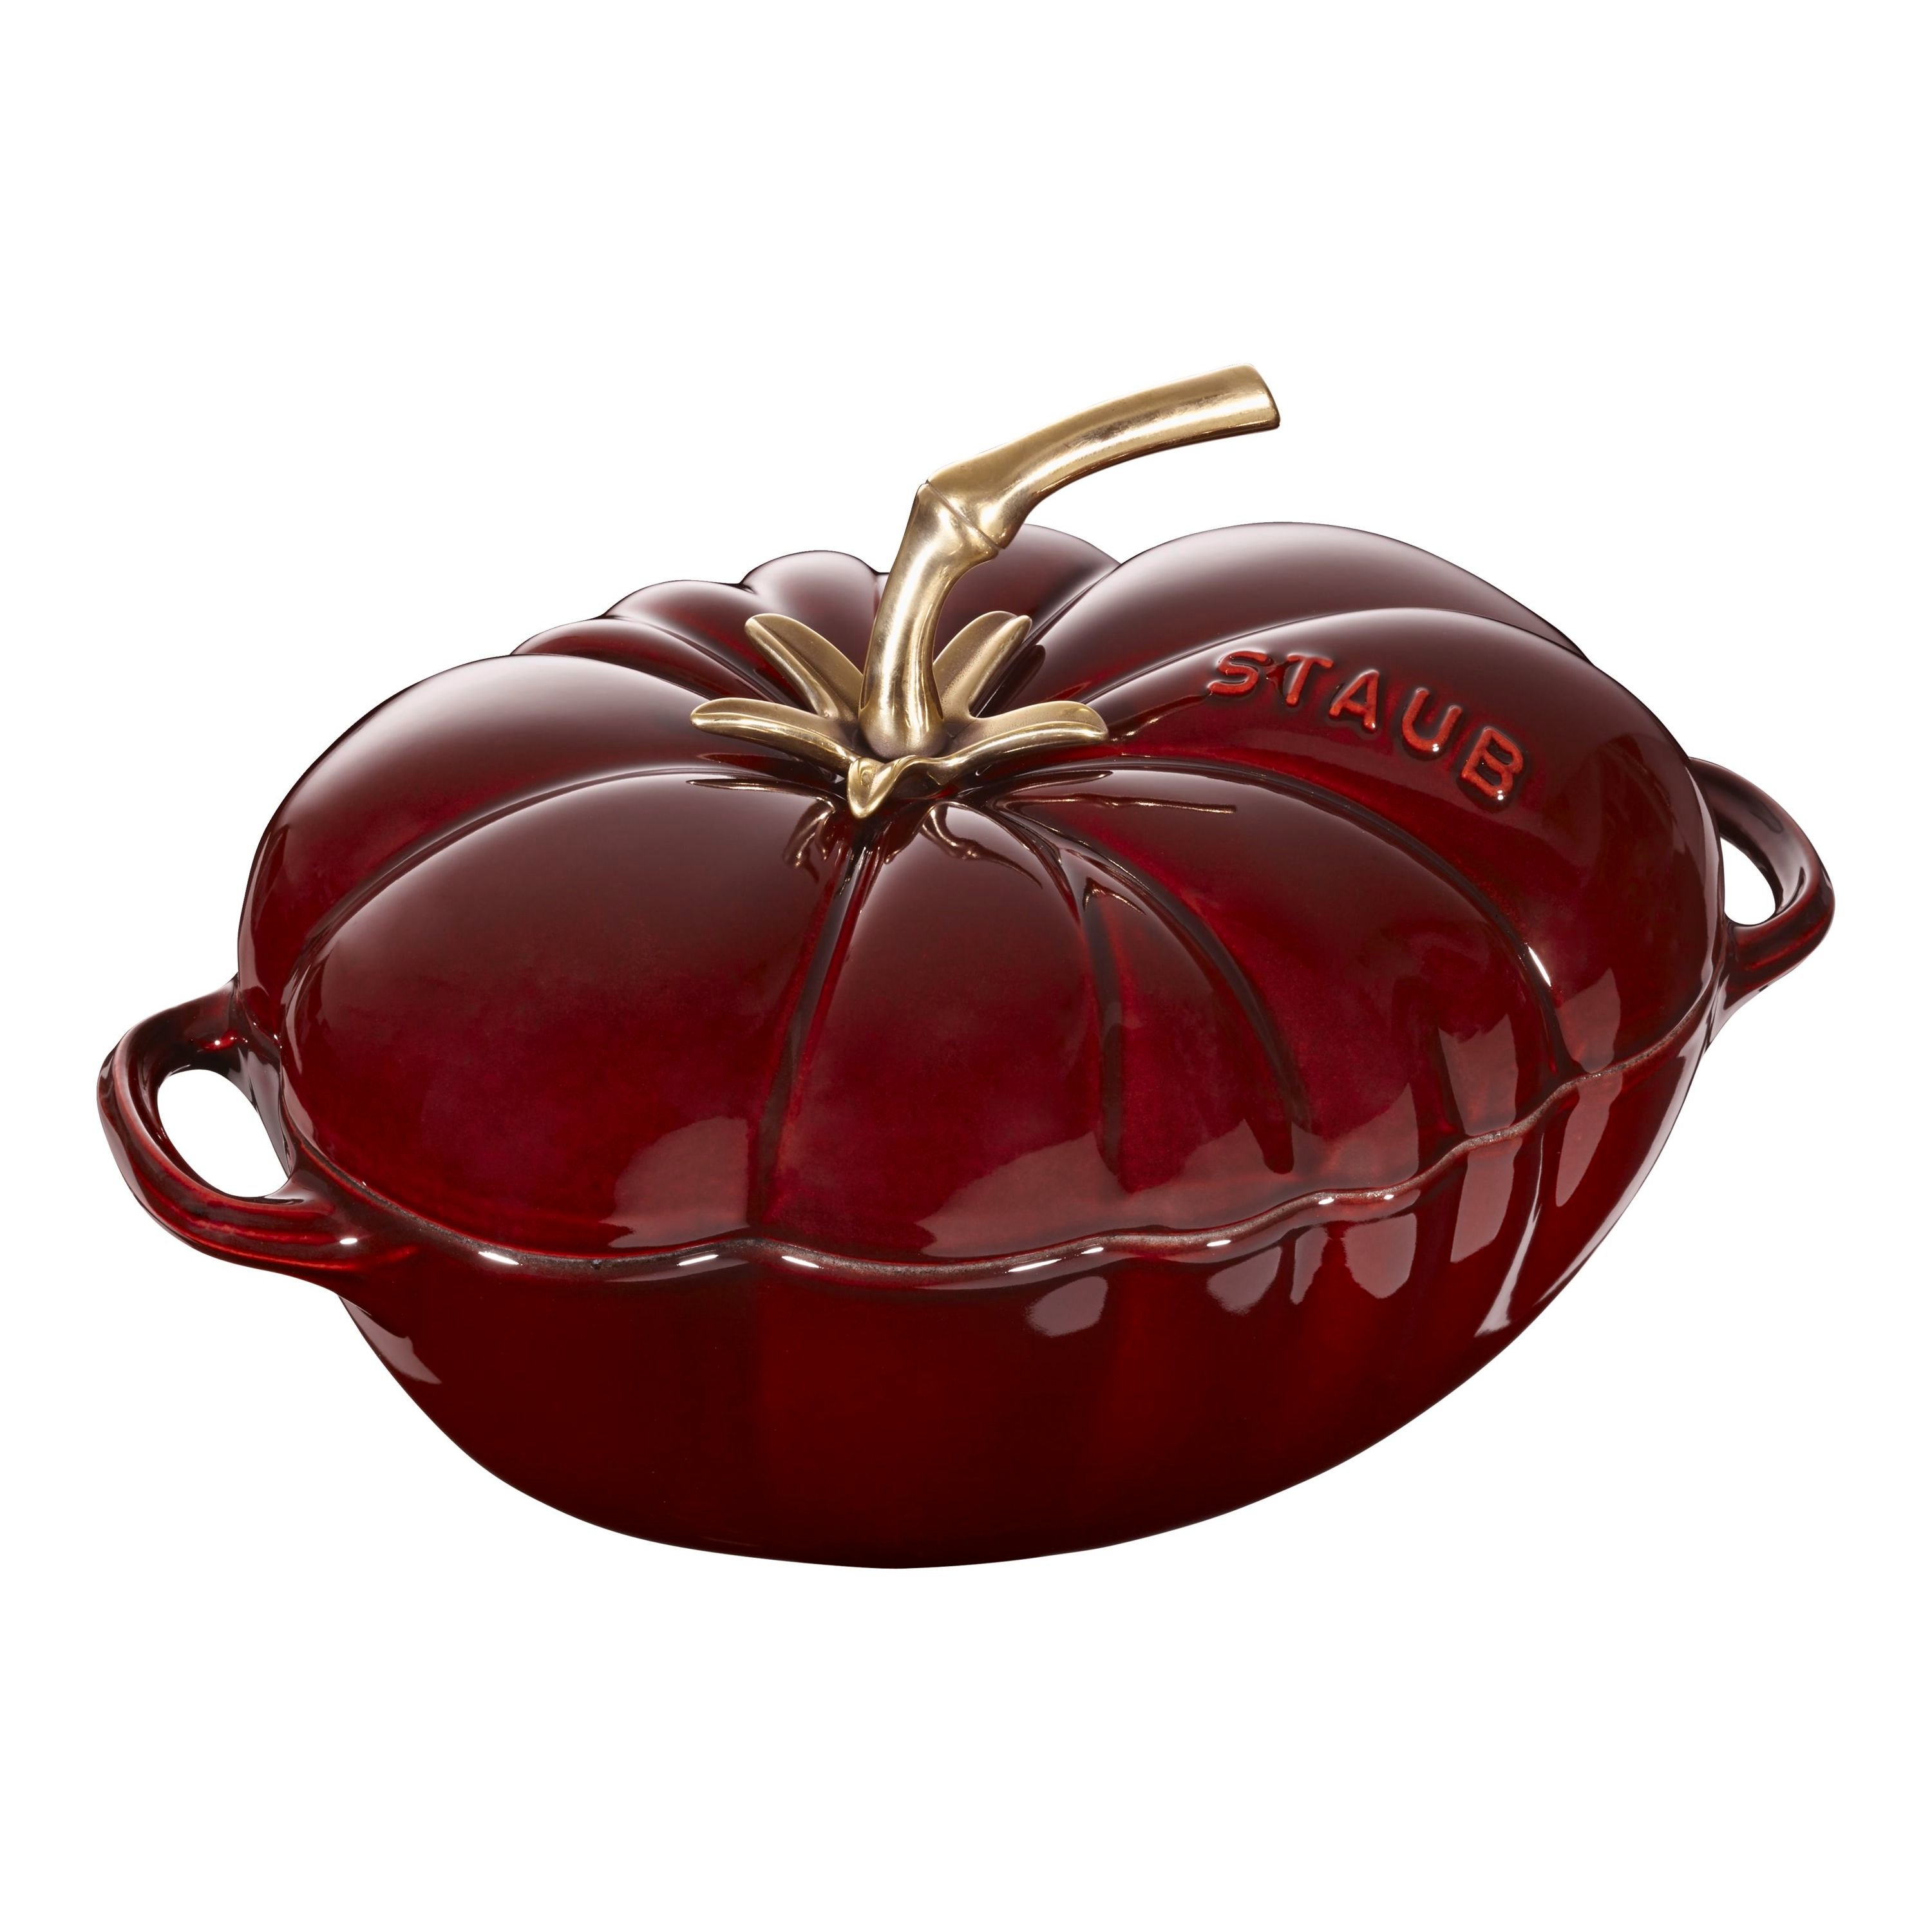 Specialty Cookware, Tomato Cocottes, Au Gratin